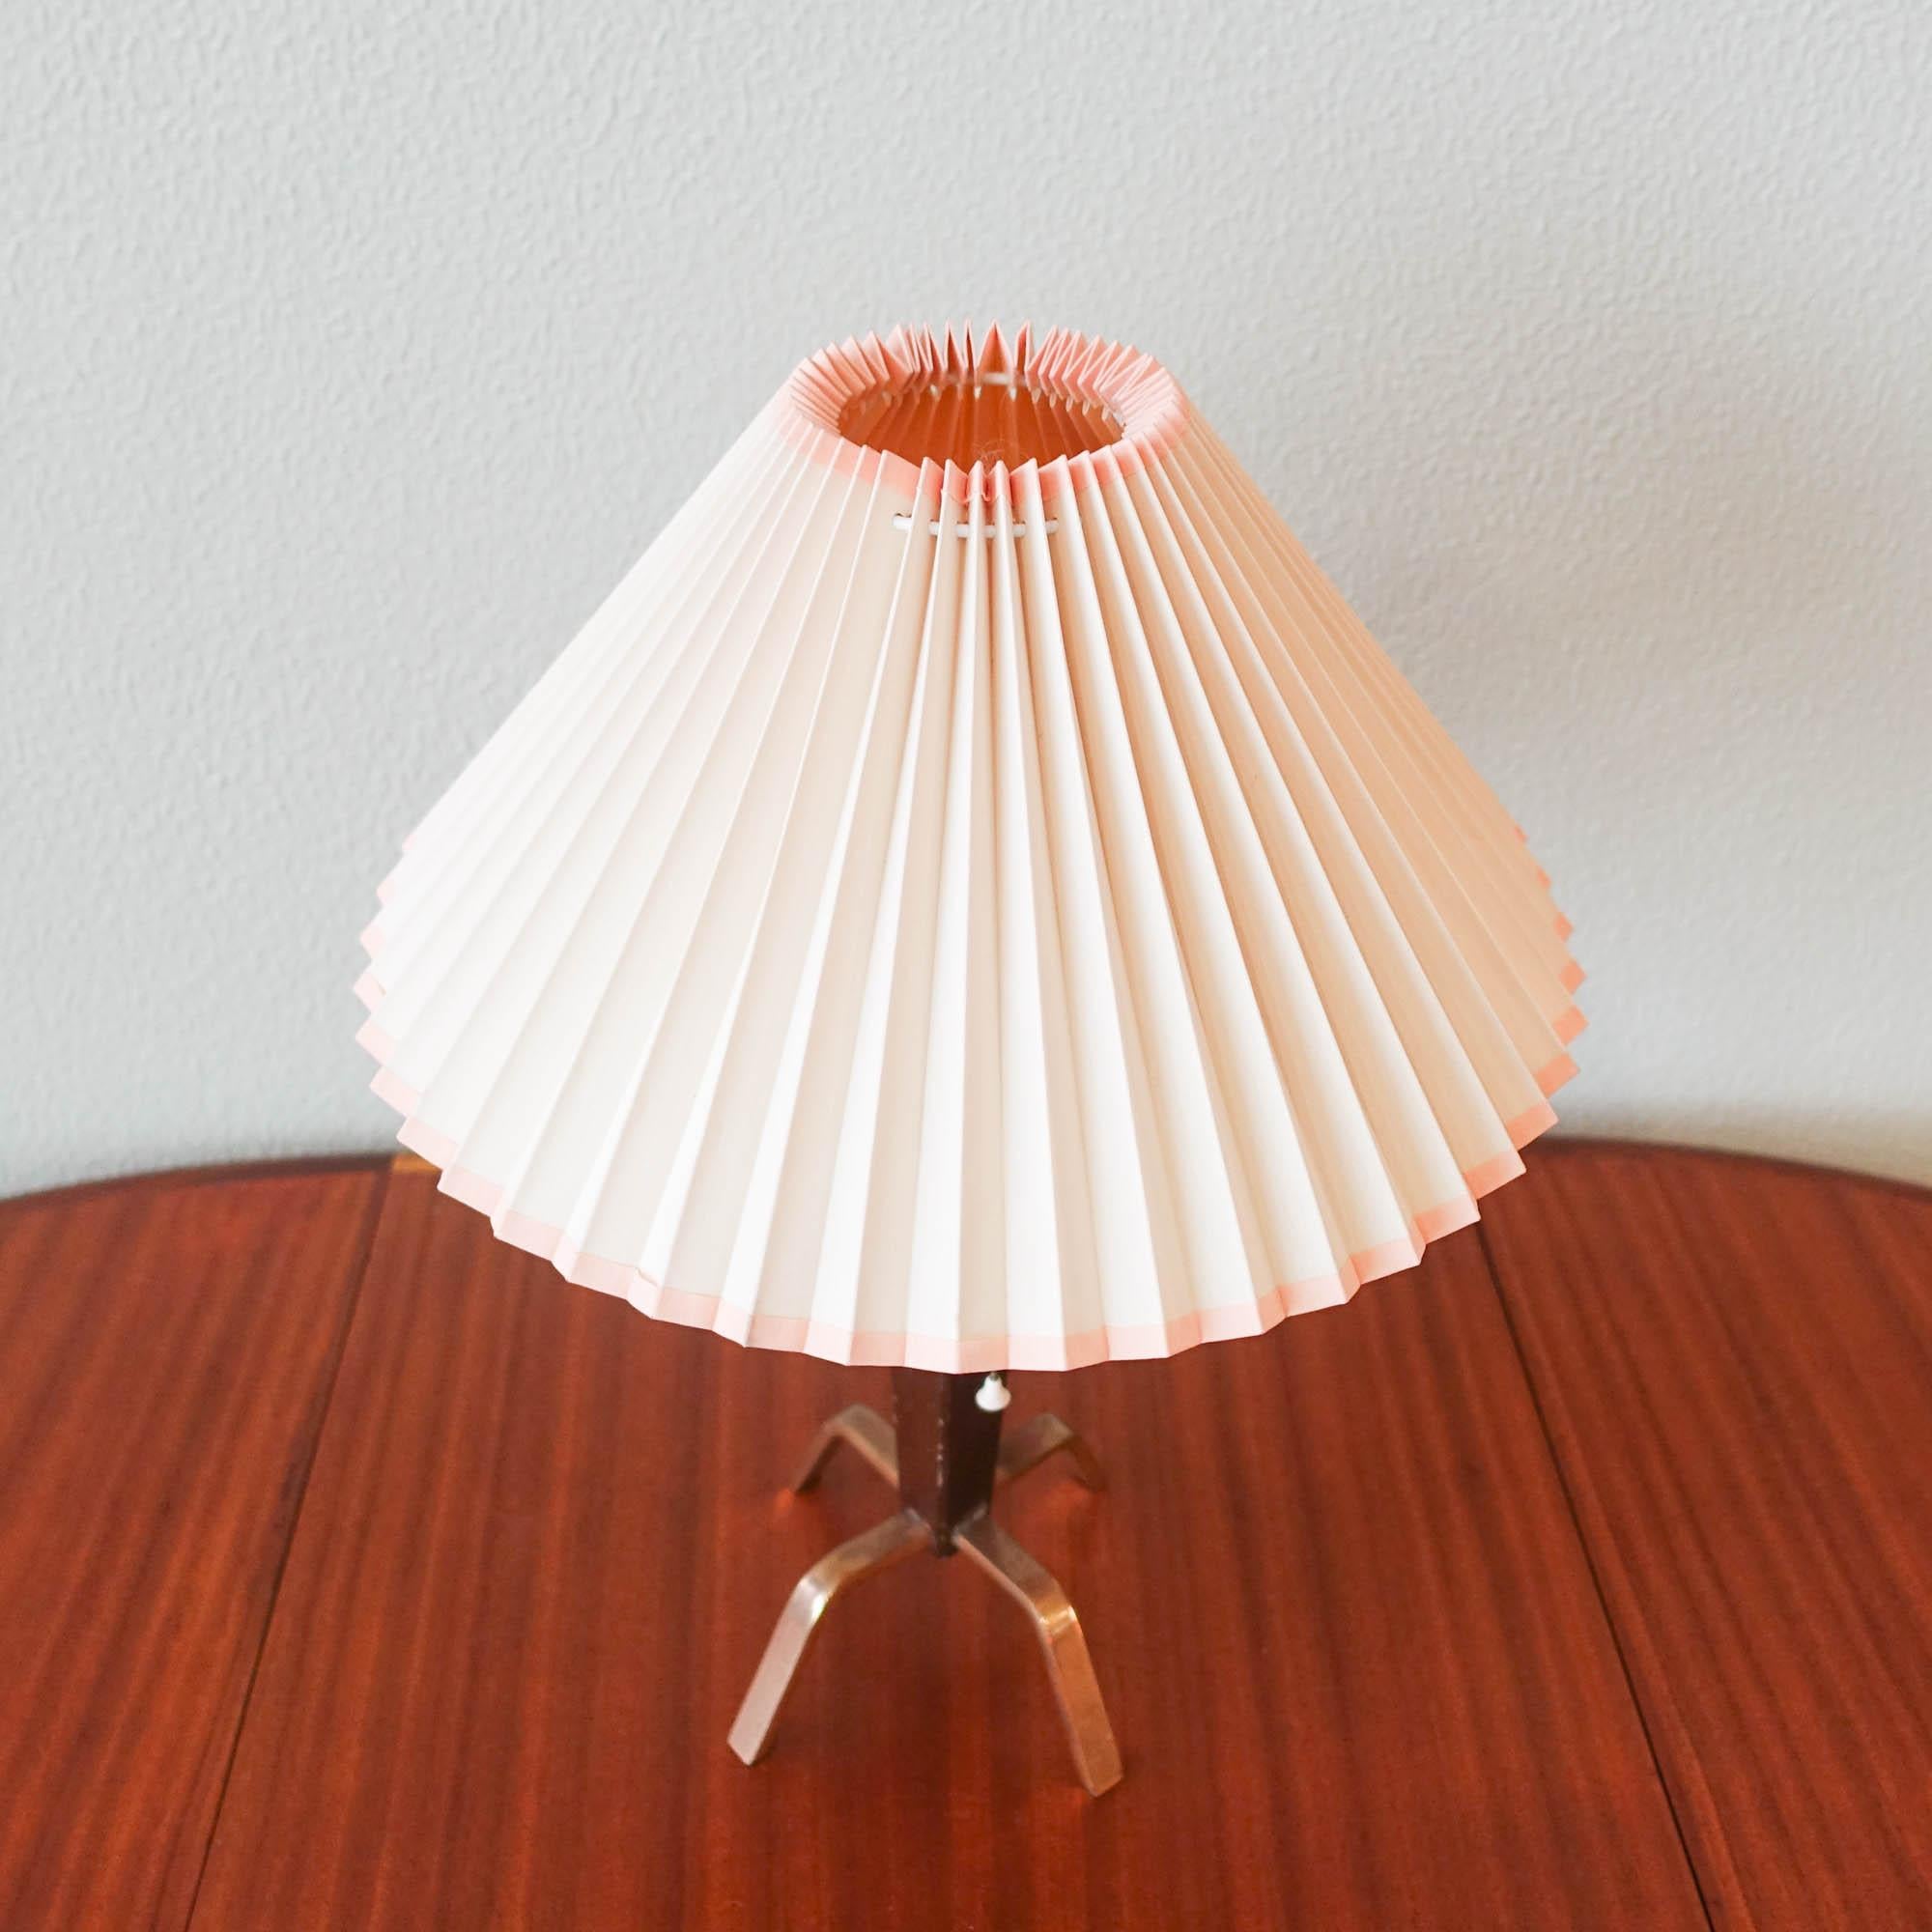 Mid-Century Danish Table Lamp in Wood & Brass, 1950s For Sale 2